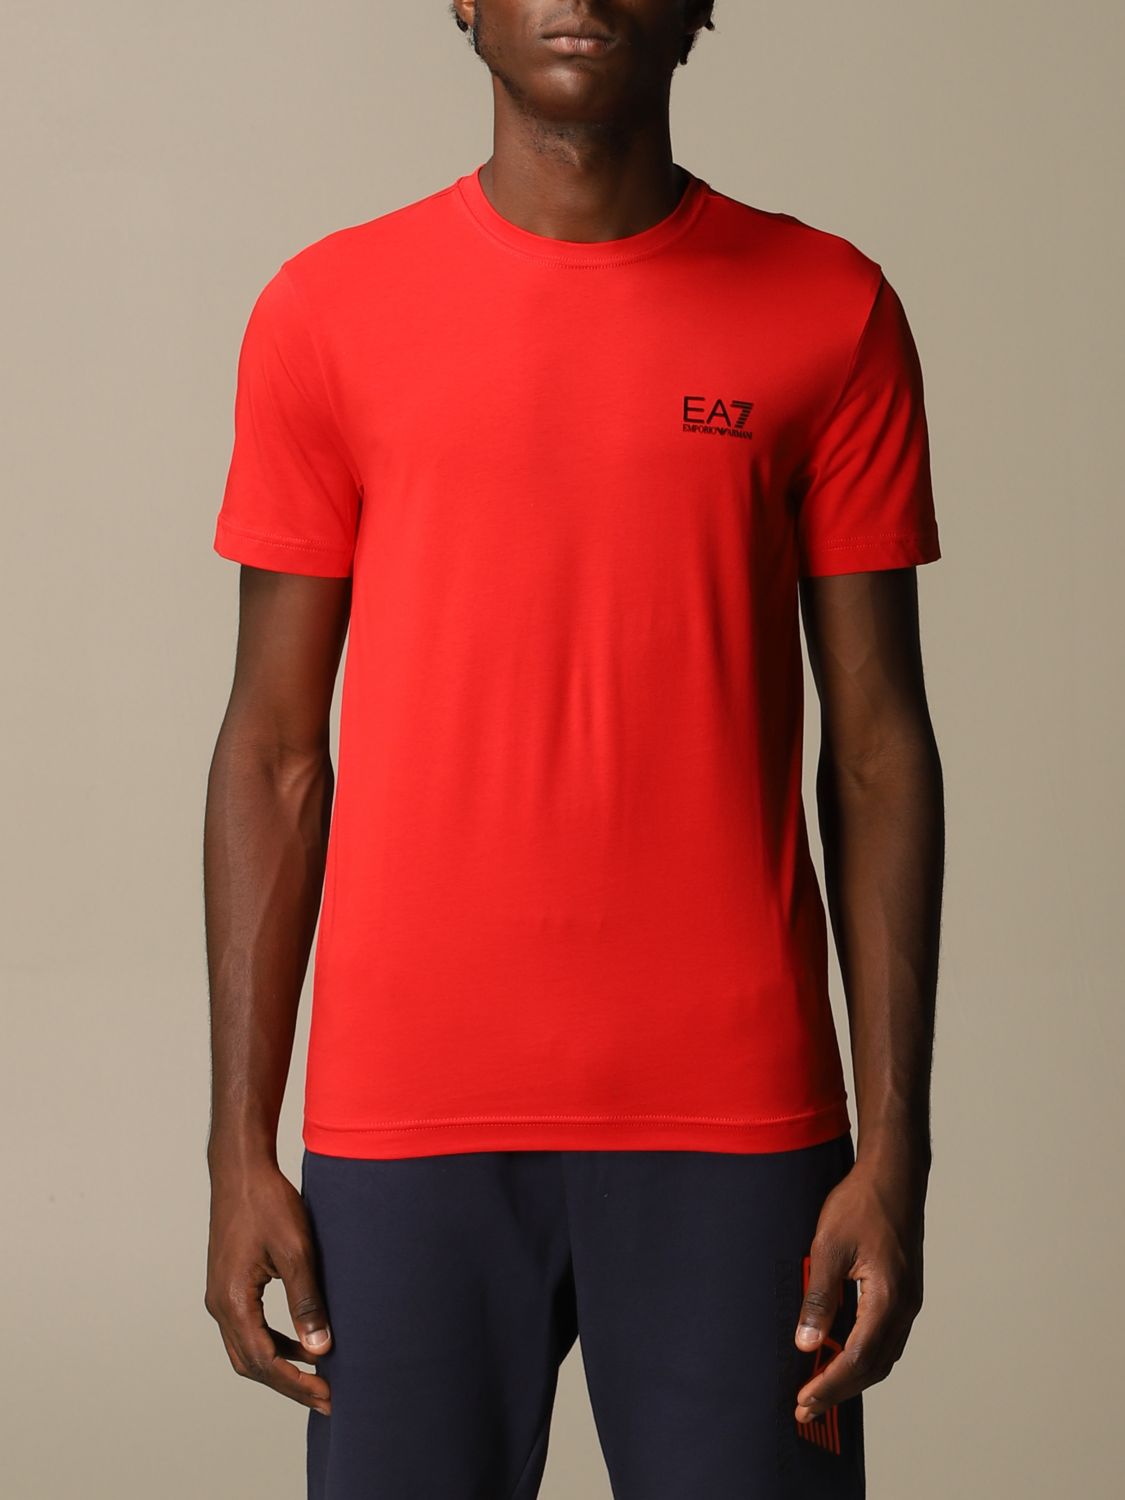 Ea7 Outlet: cotton T-shirt with logoed band - Red | Ea7 t-shirt 6HPT11 ...